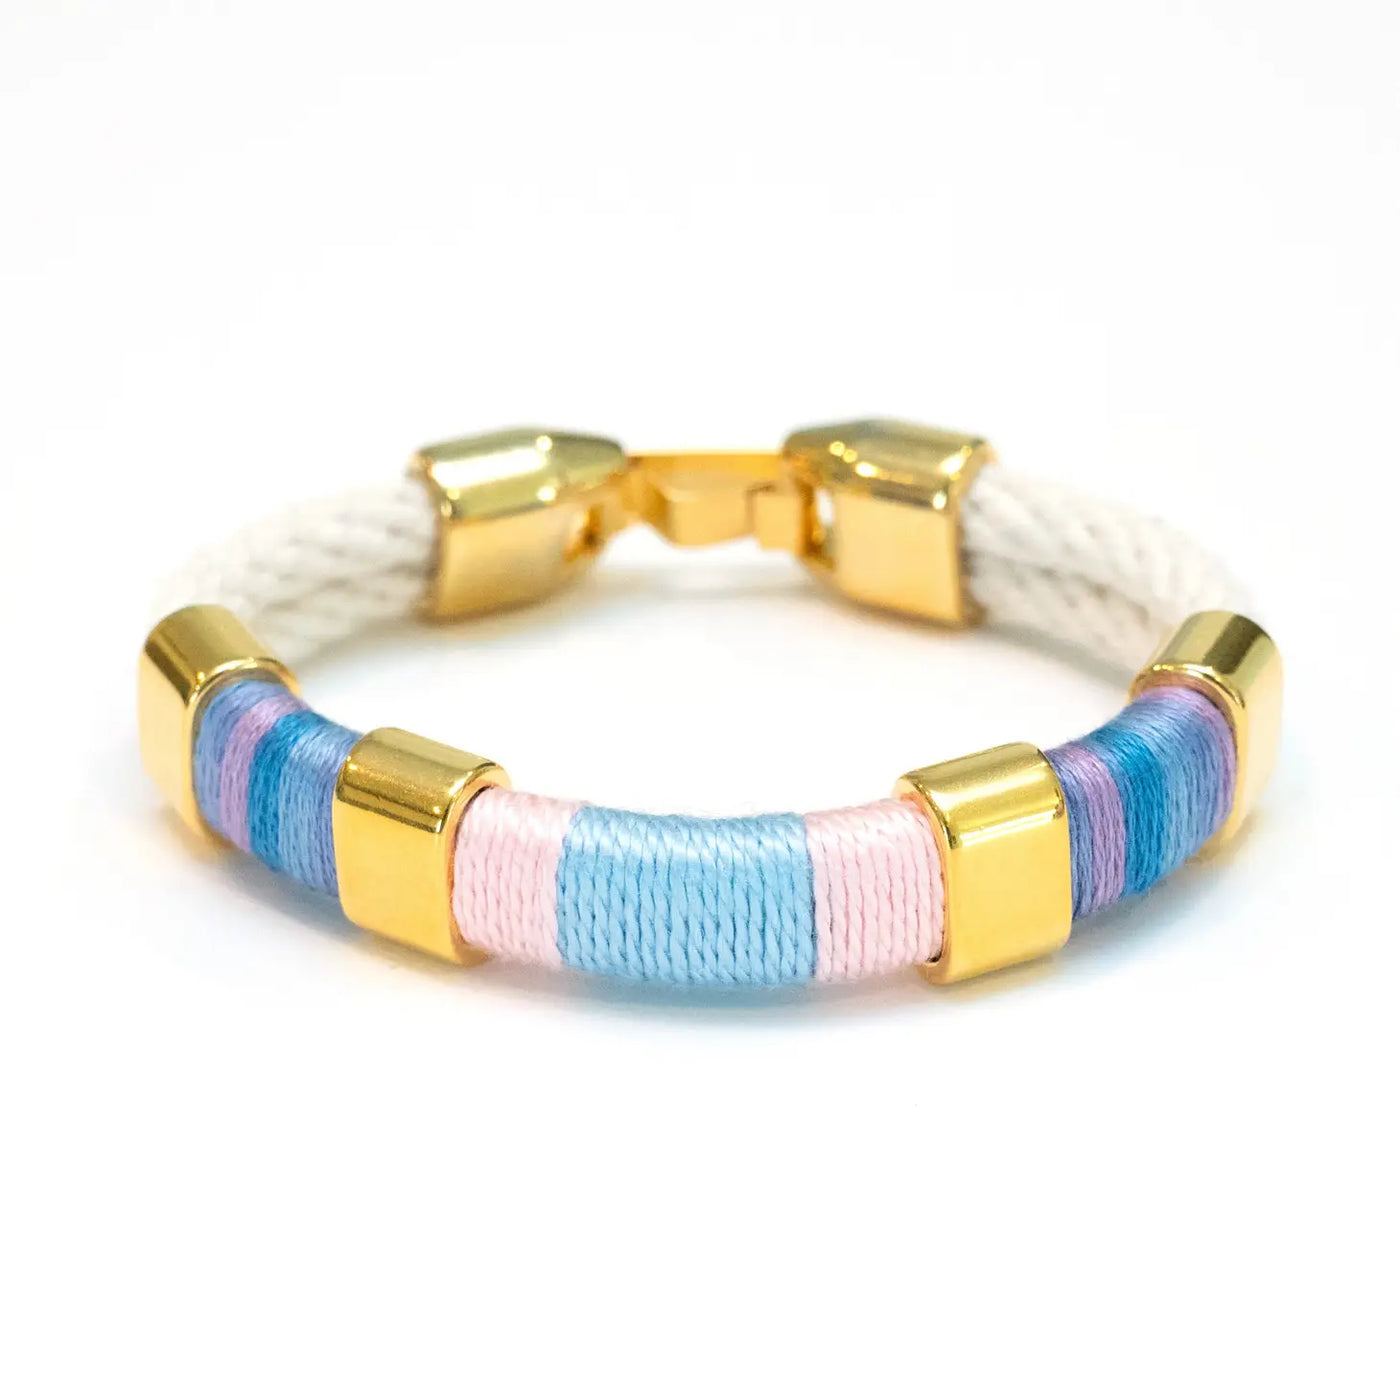 coastal grandma New England preppy style bracelet rope gold silver wrapped hydrangea colored pink blue purple chic summery summertime vibes east coast Modern smart causal female chic effortless outfit womens ladies gift elegant effortless clothing everyday stylish clothes apparel outfits chic winter summer style women’s boutique trendy teacher office cute outfit boutique clothes fashion quality work from home coastal beachy lounge athleisure gift for her midsize curvy sizes 